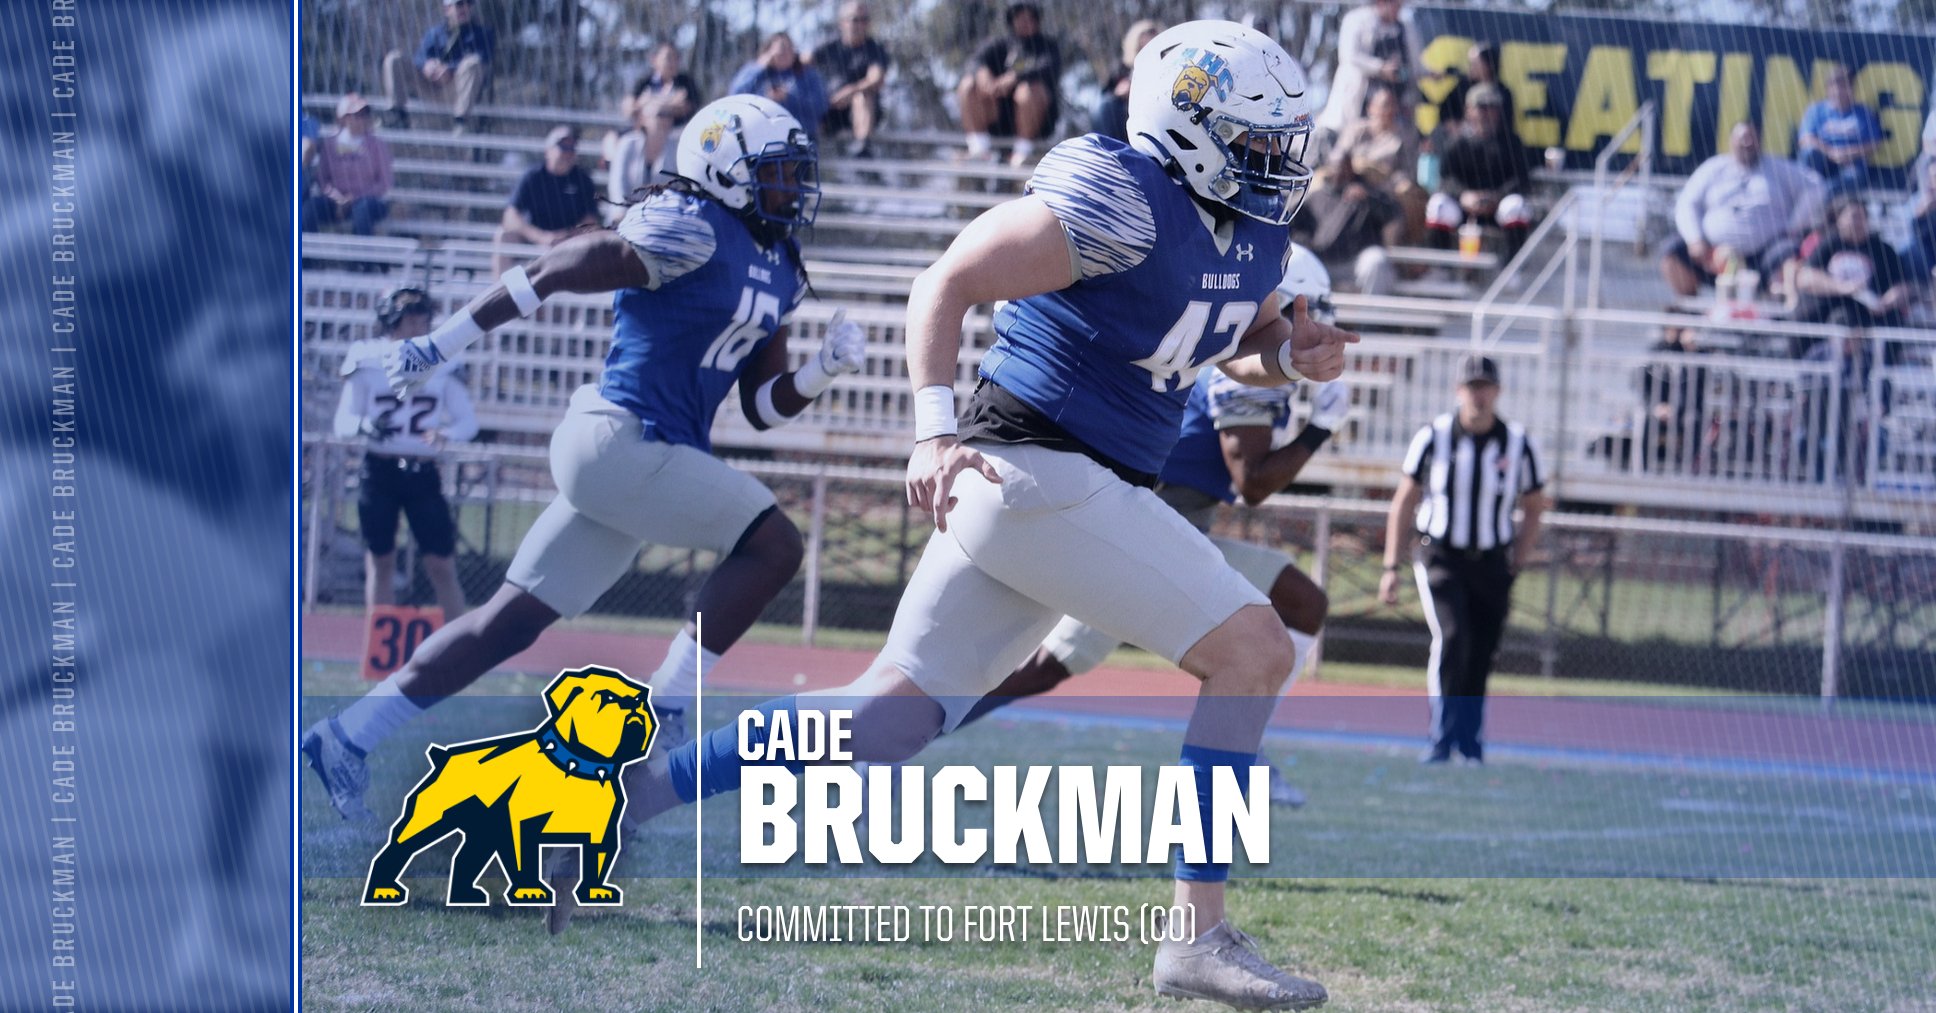 Football's Cade Bruckman Commits to Fort Lewis College